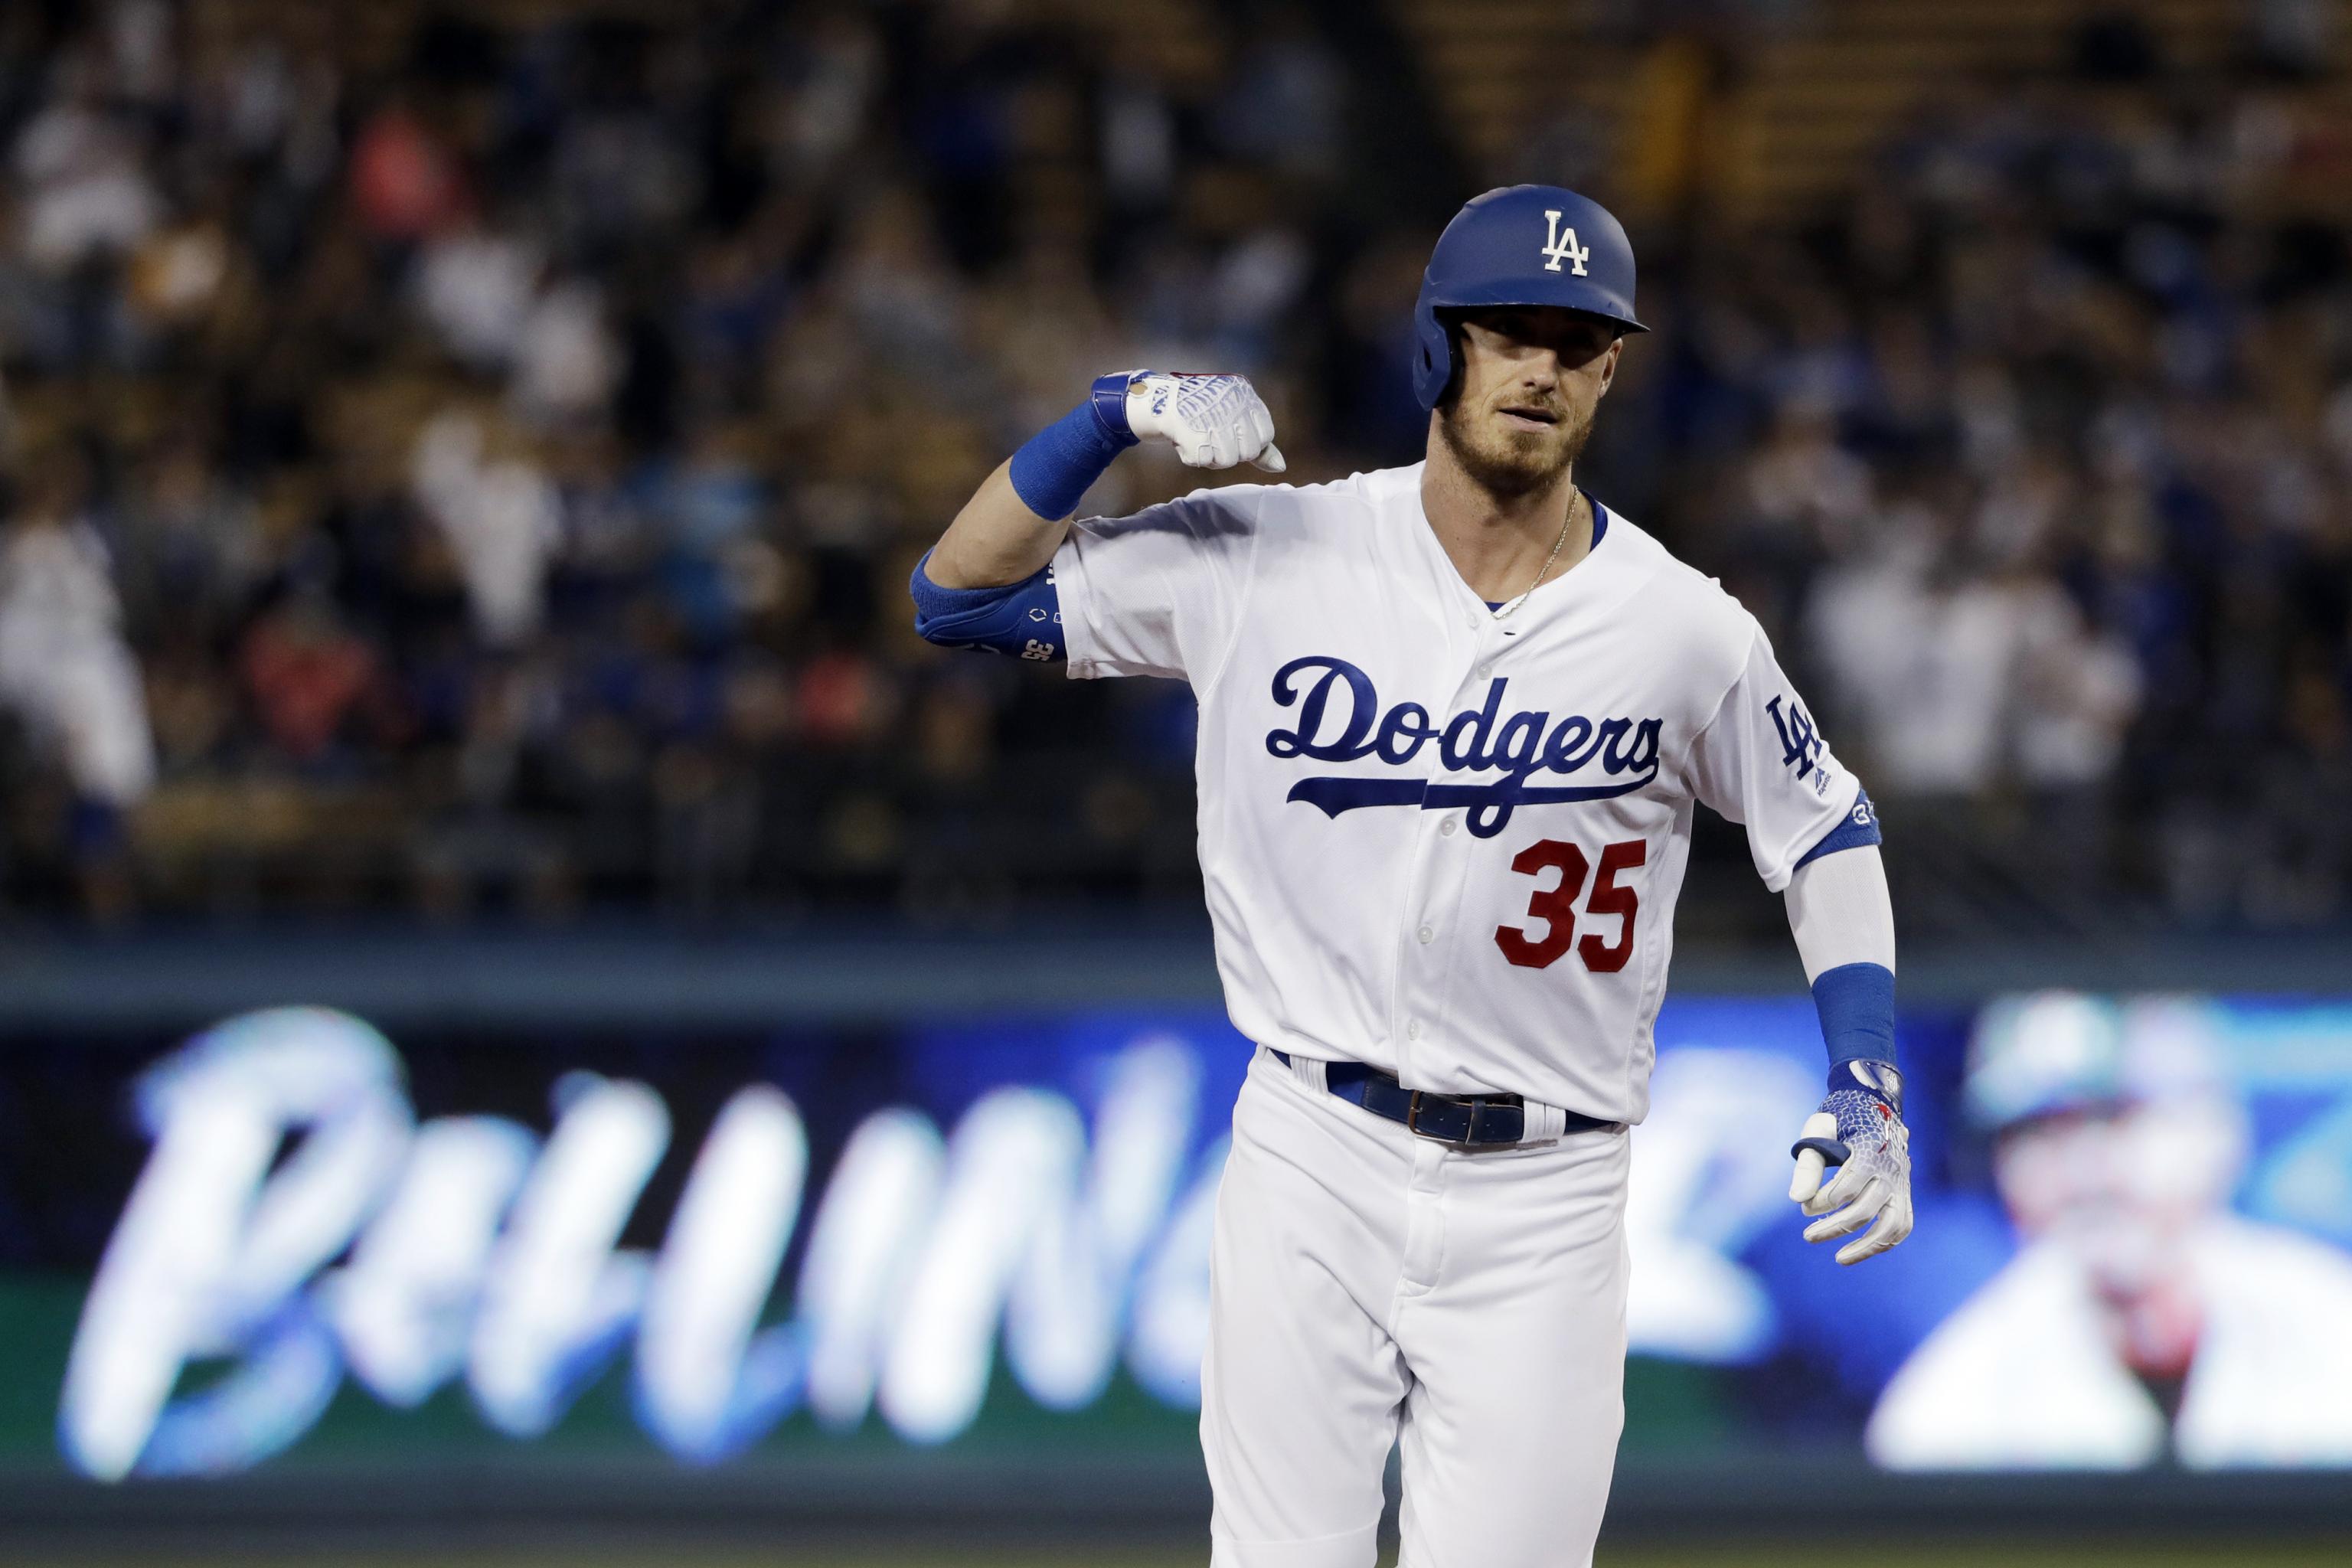 How Dodgers Megastar Cody Bellinger Could Actually Chase a .400